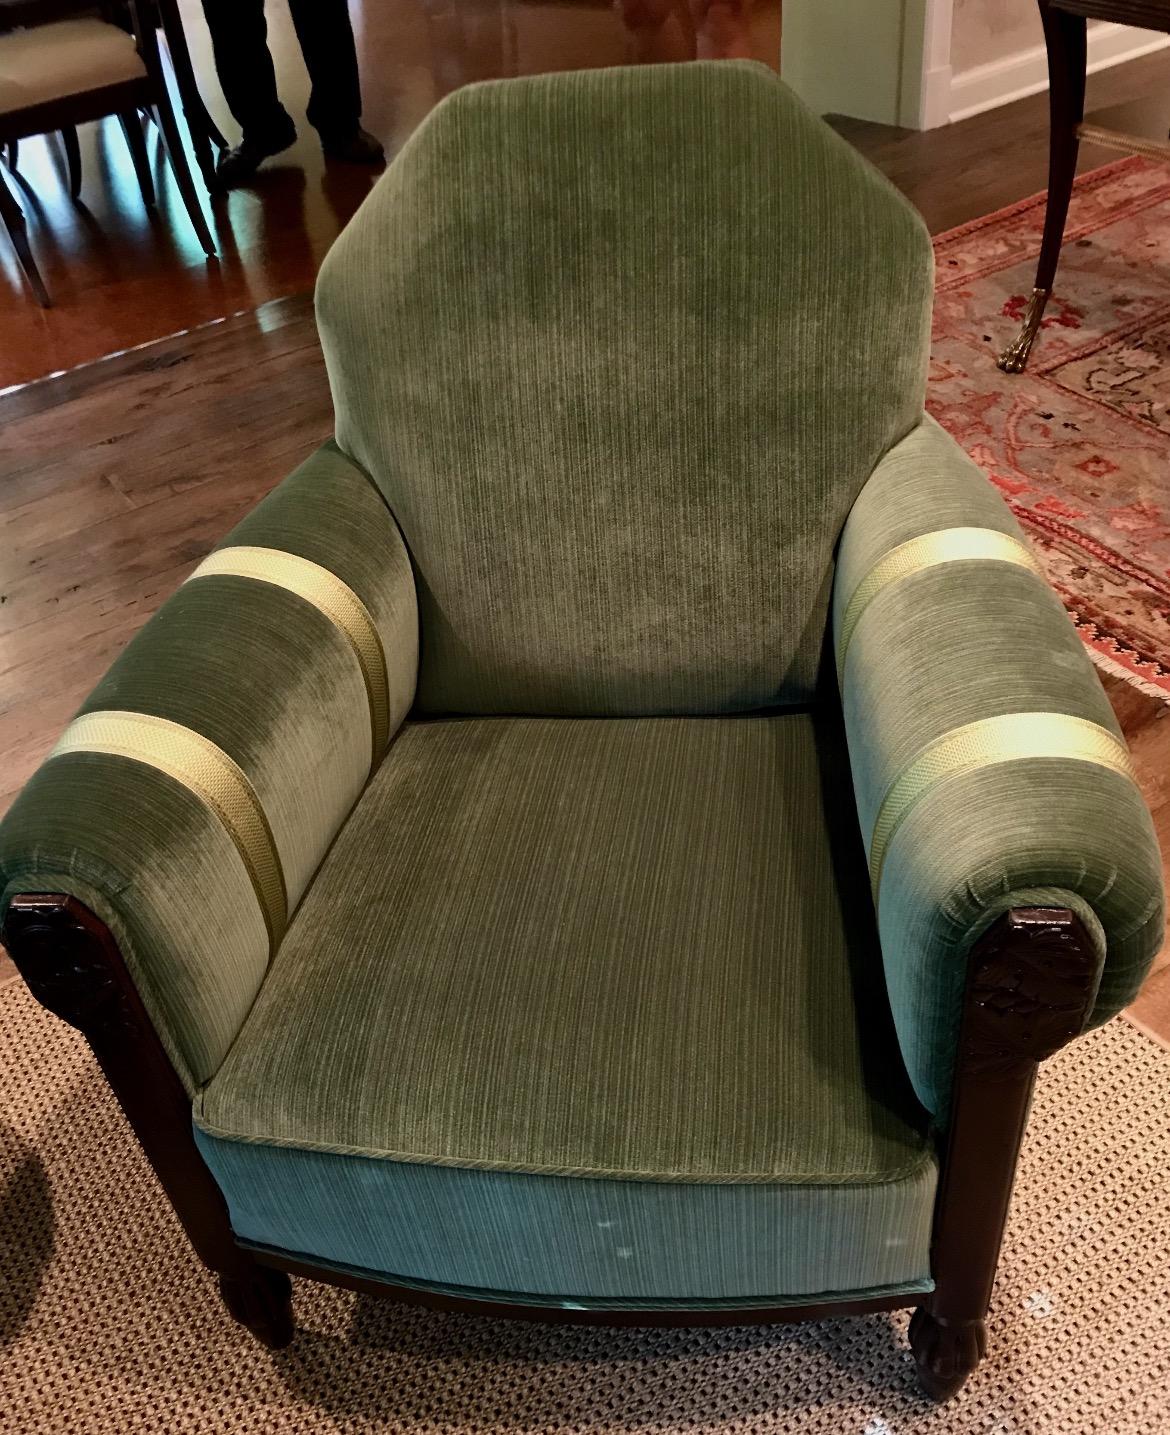 Art Deco period armchairs from France c. 1935 featuring a dark walnut frame. Freshly upholstered in Kravet green cotton velvet fabric and detailed with Samuel & Sons silk trim in double rows on the arms. The relief carving in the wood on the